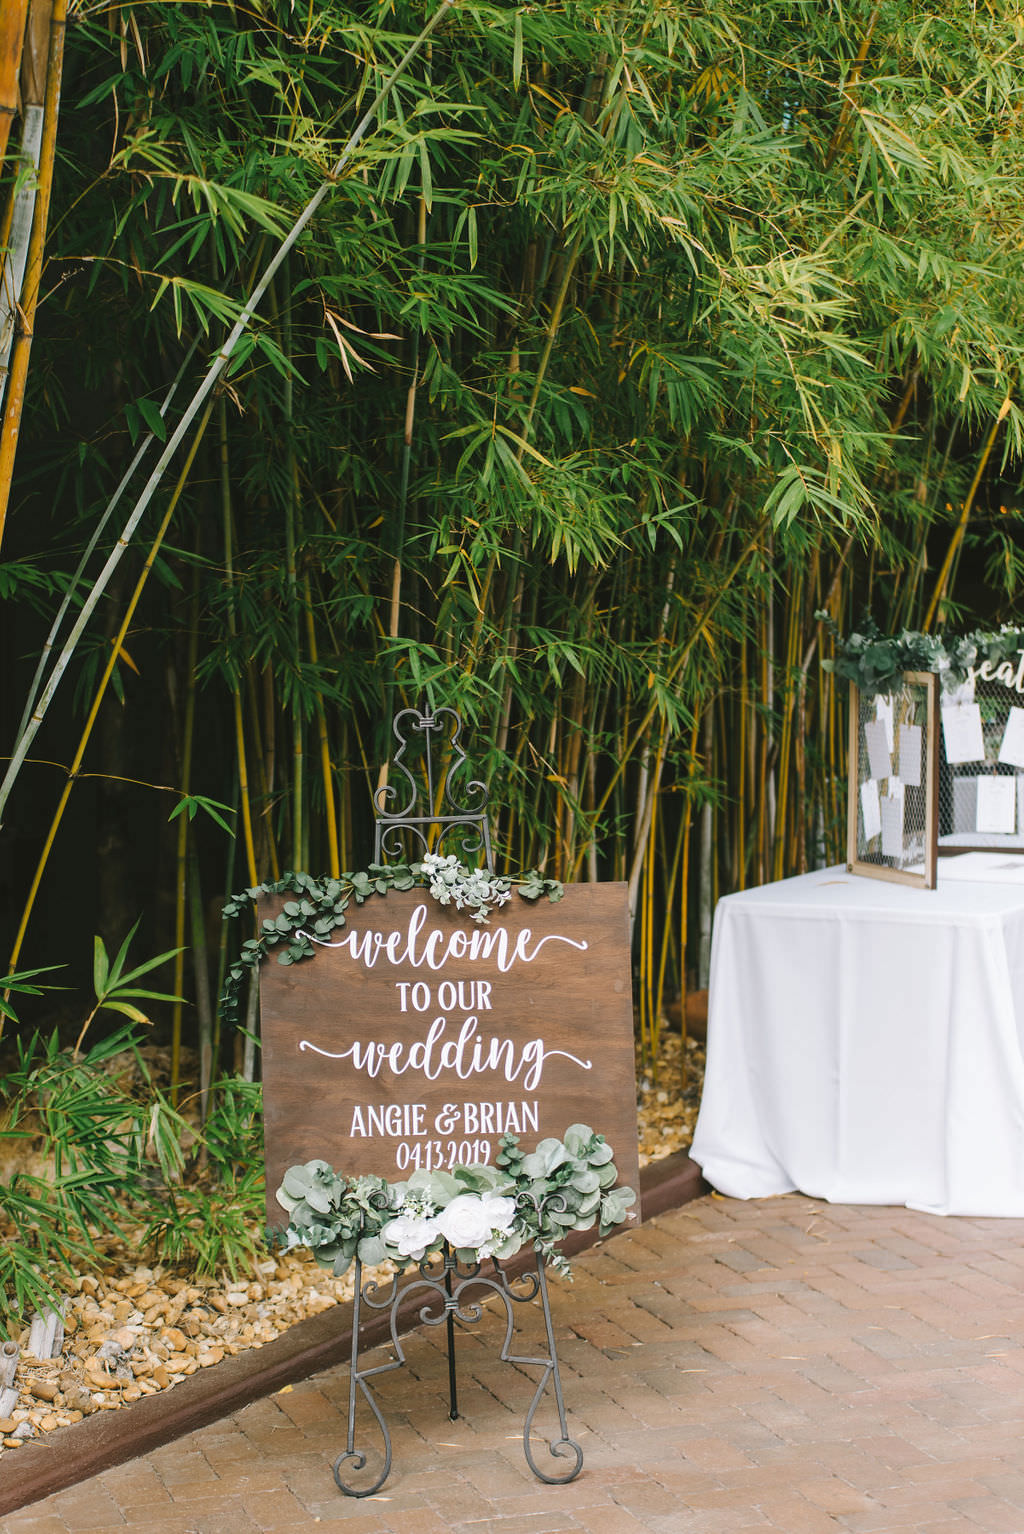 Romantic, Modern, Rustic Green and White Wedding Decor, Florida Outdoor Ceremony Wooden Welcome Sign with Calligraphy, in Bamboo Courtyard | Downtown St. Pete Venue NOVA 535 | Florida Wedding Photographer Kera Photography